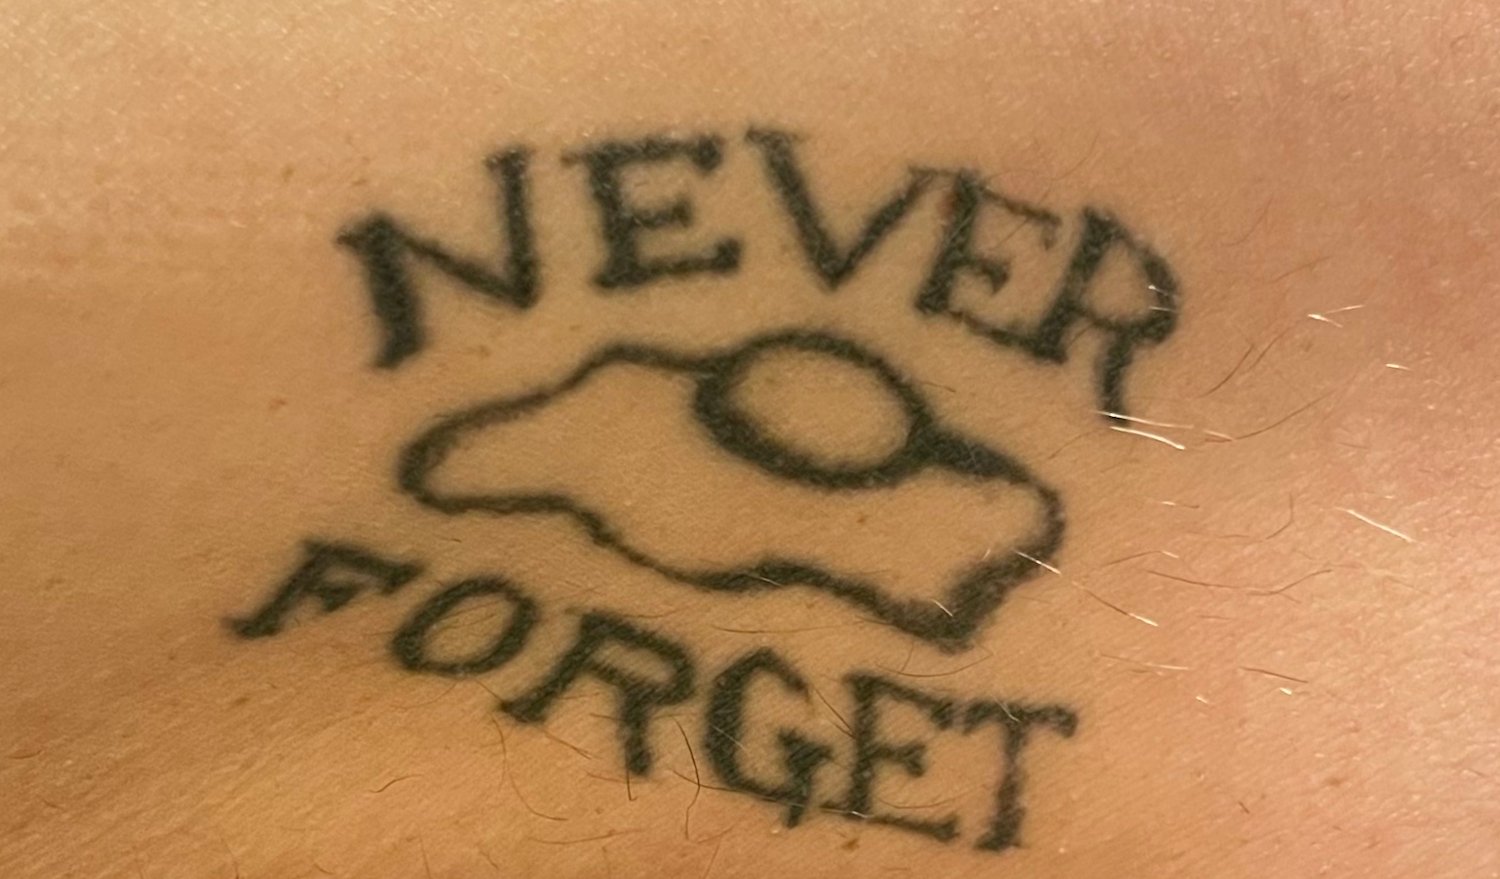 San Diego regrettable tattoo of an egg featuring the text "Never Forget"